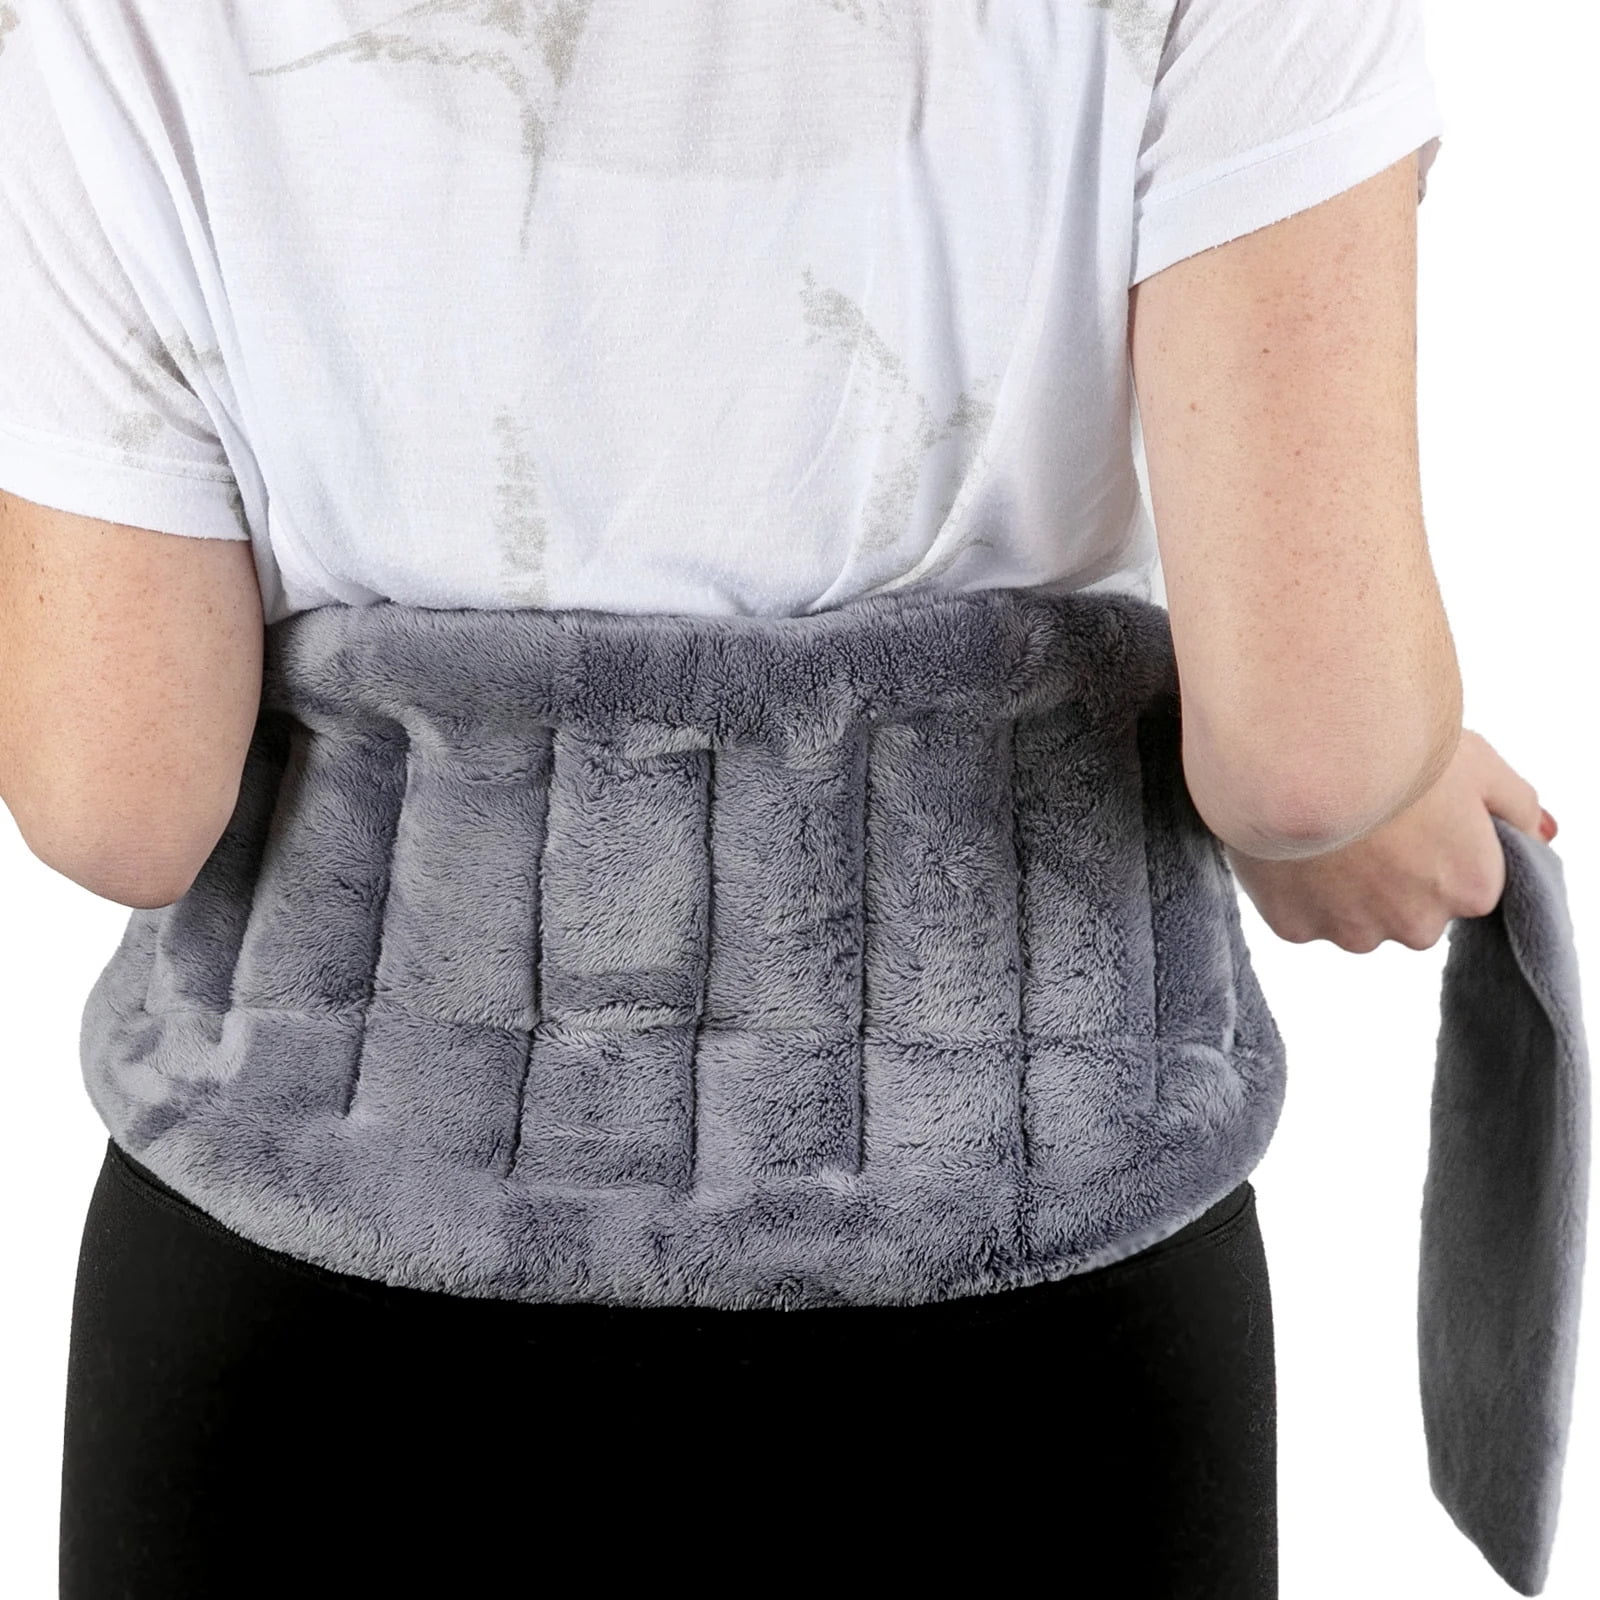 Buy Rice-flax Seed Therapeutic Heating/cooling Pad and Neck Wrap